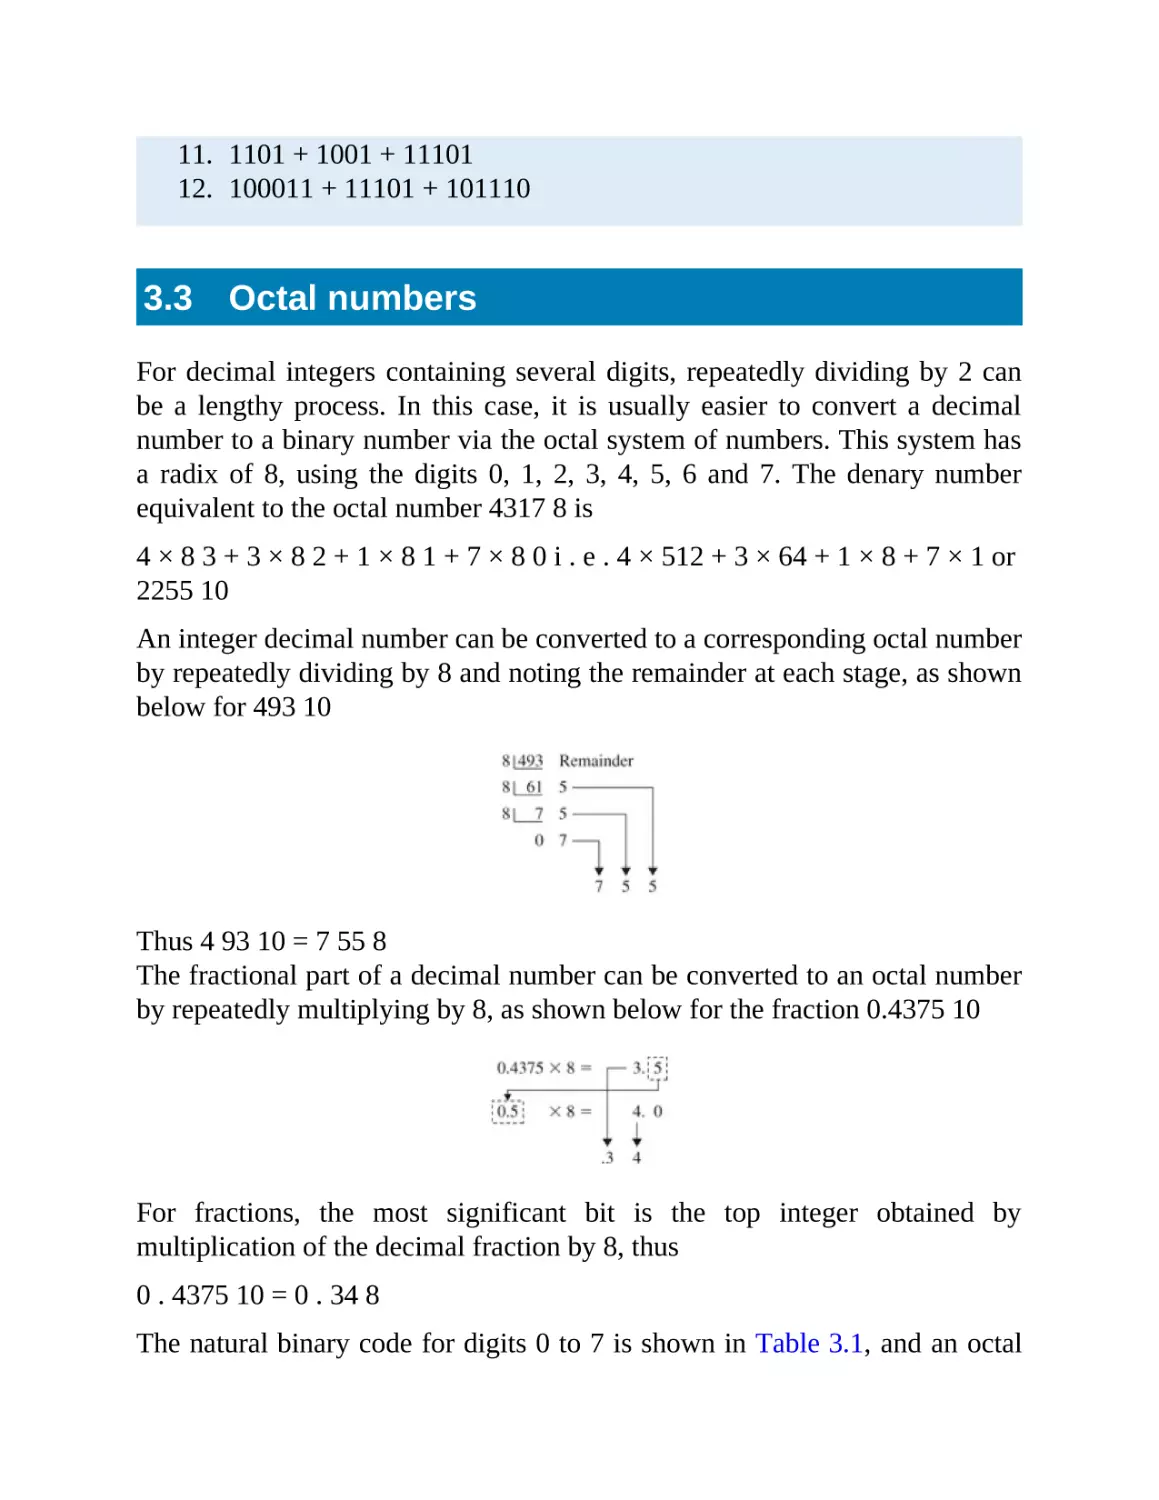 3.3 Octal numbers